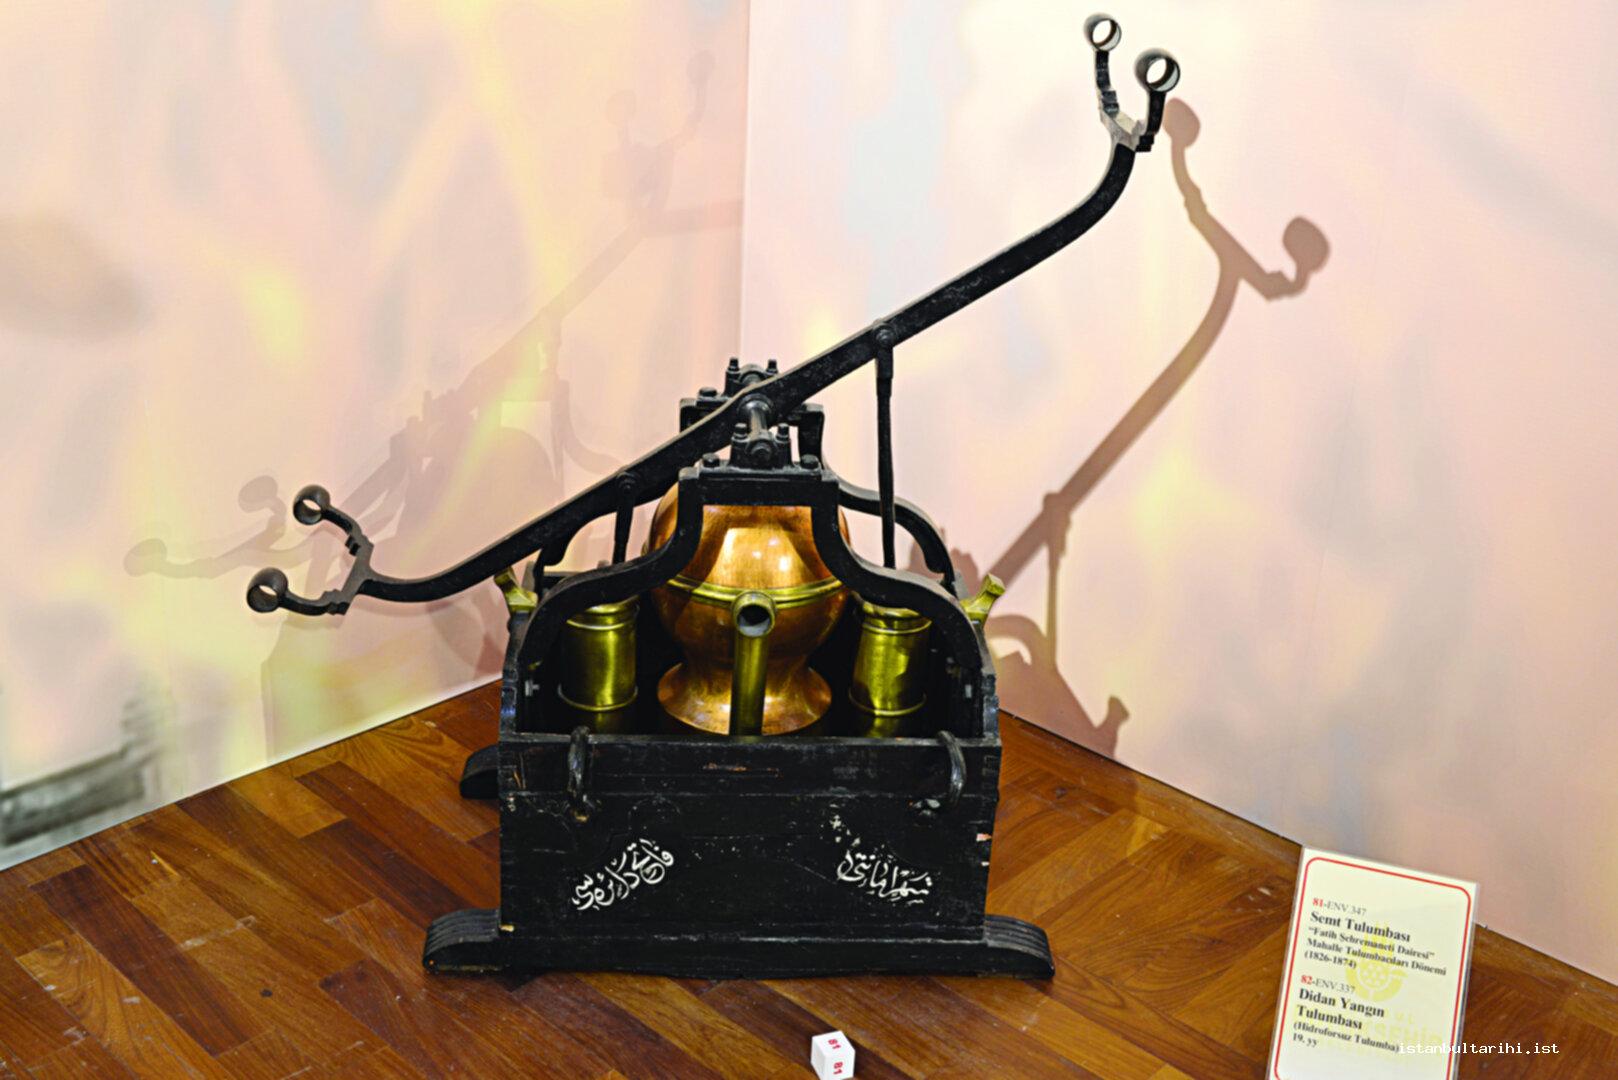 8c- The district pumps used in extinguishing fires during the period of 1826-1874.